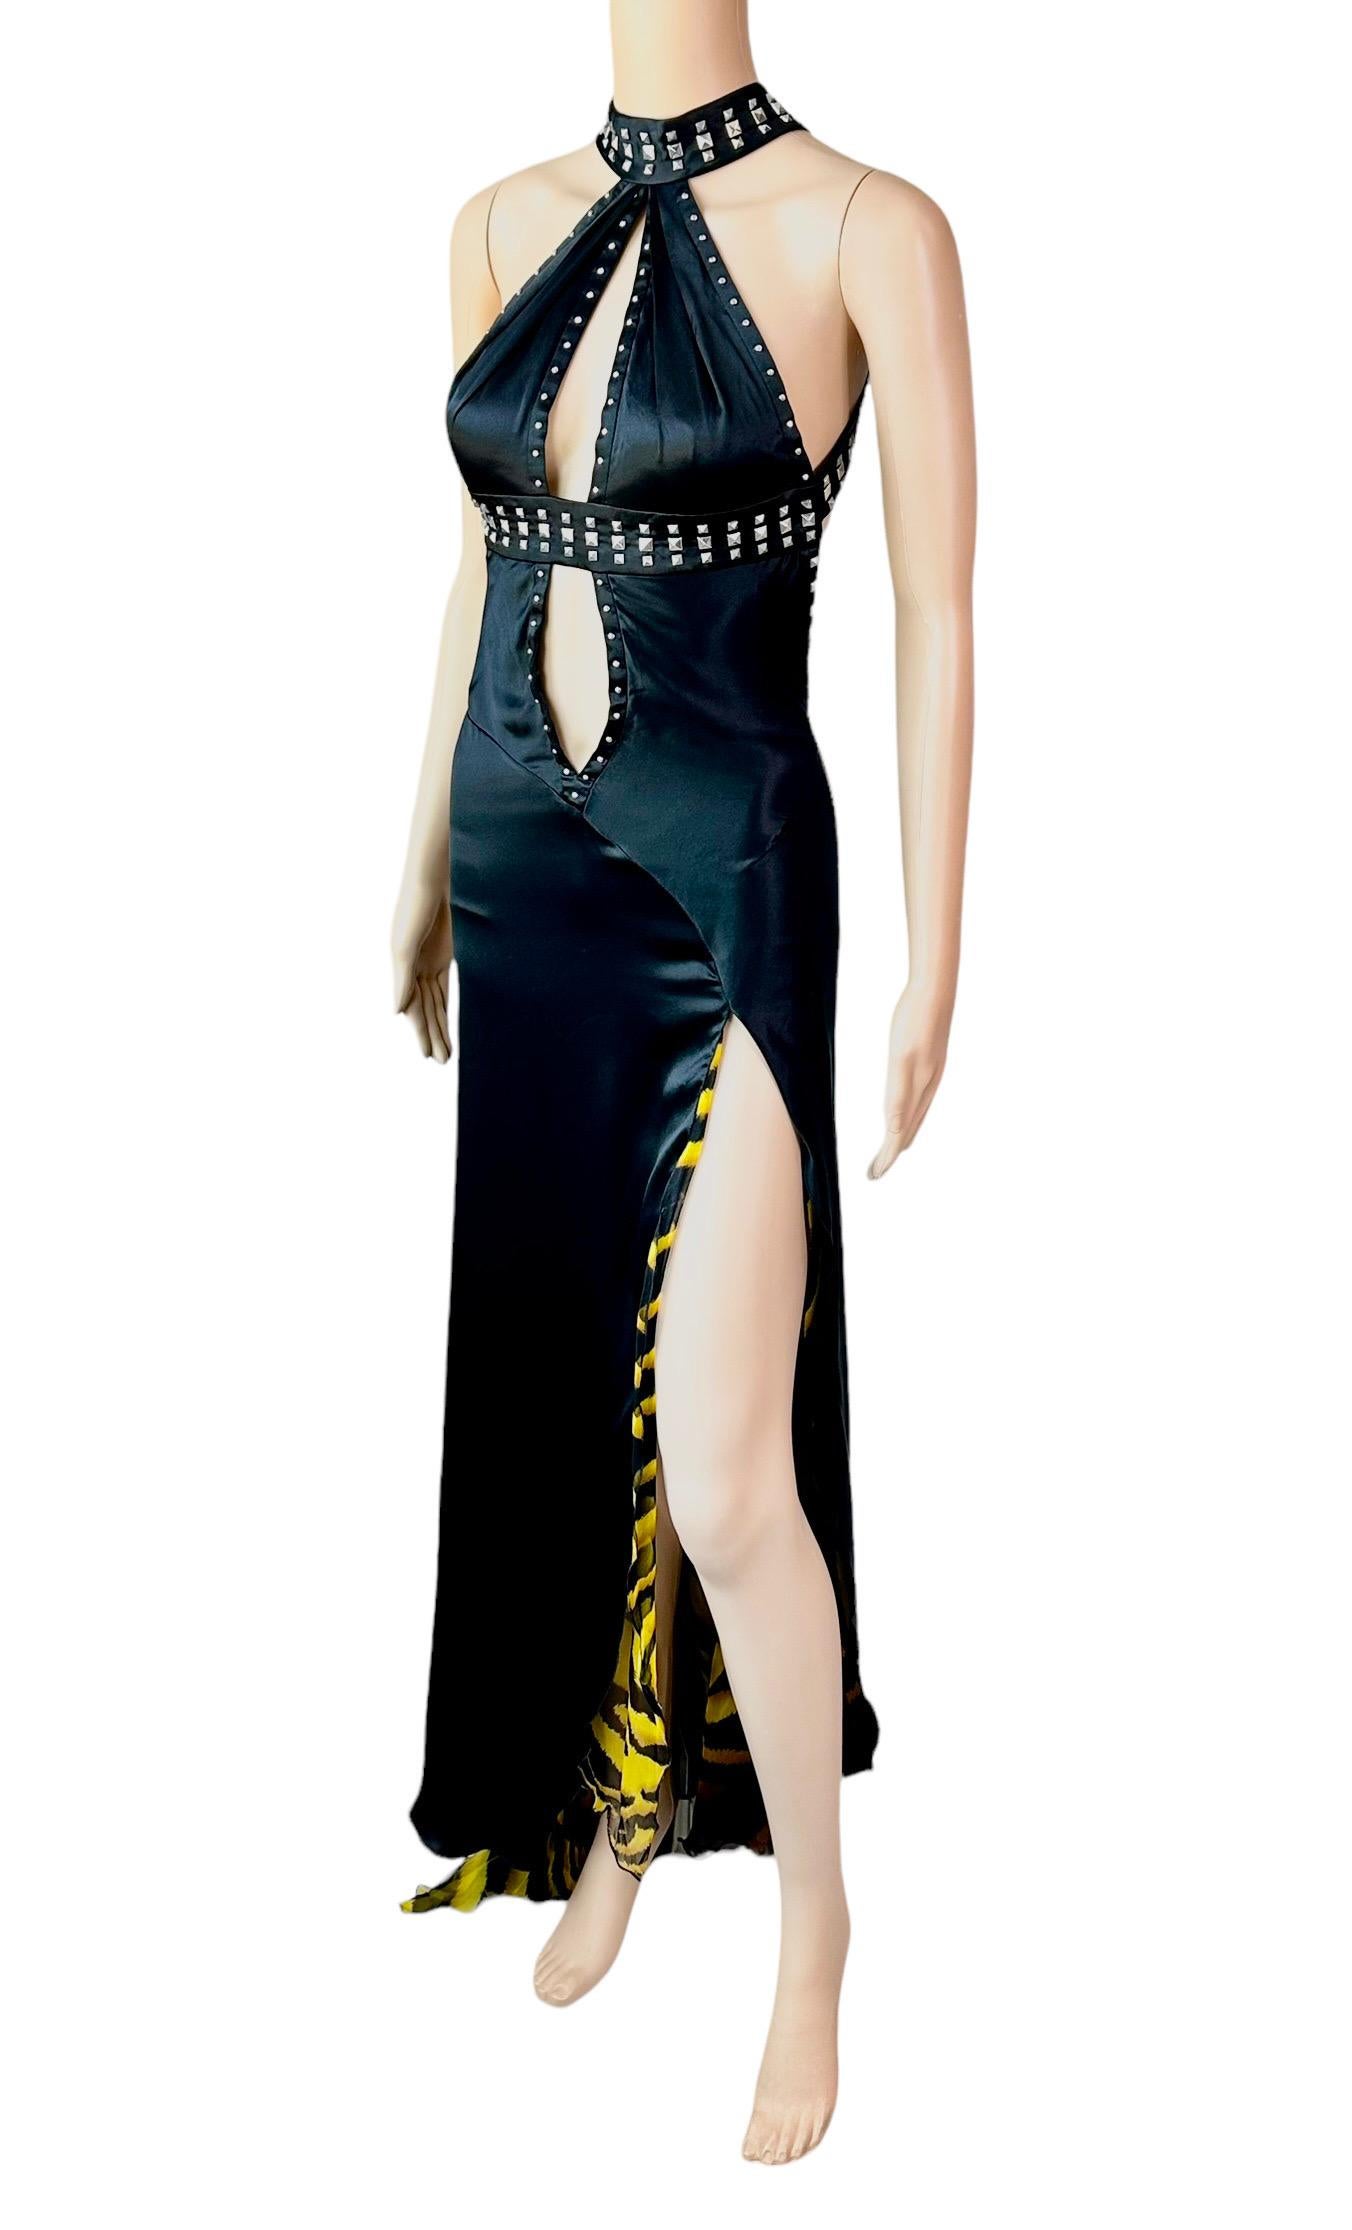 Versace F/W 2004 Runway Studded Plunging Keyhole Neckline Evening Dress Gown In Good Condition For Sale In Naples, FL